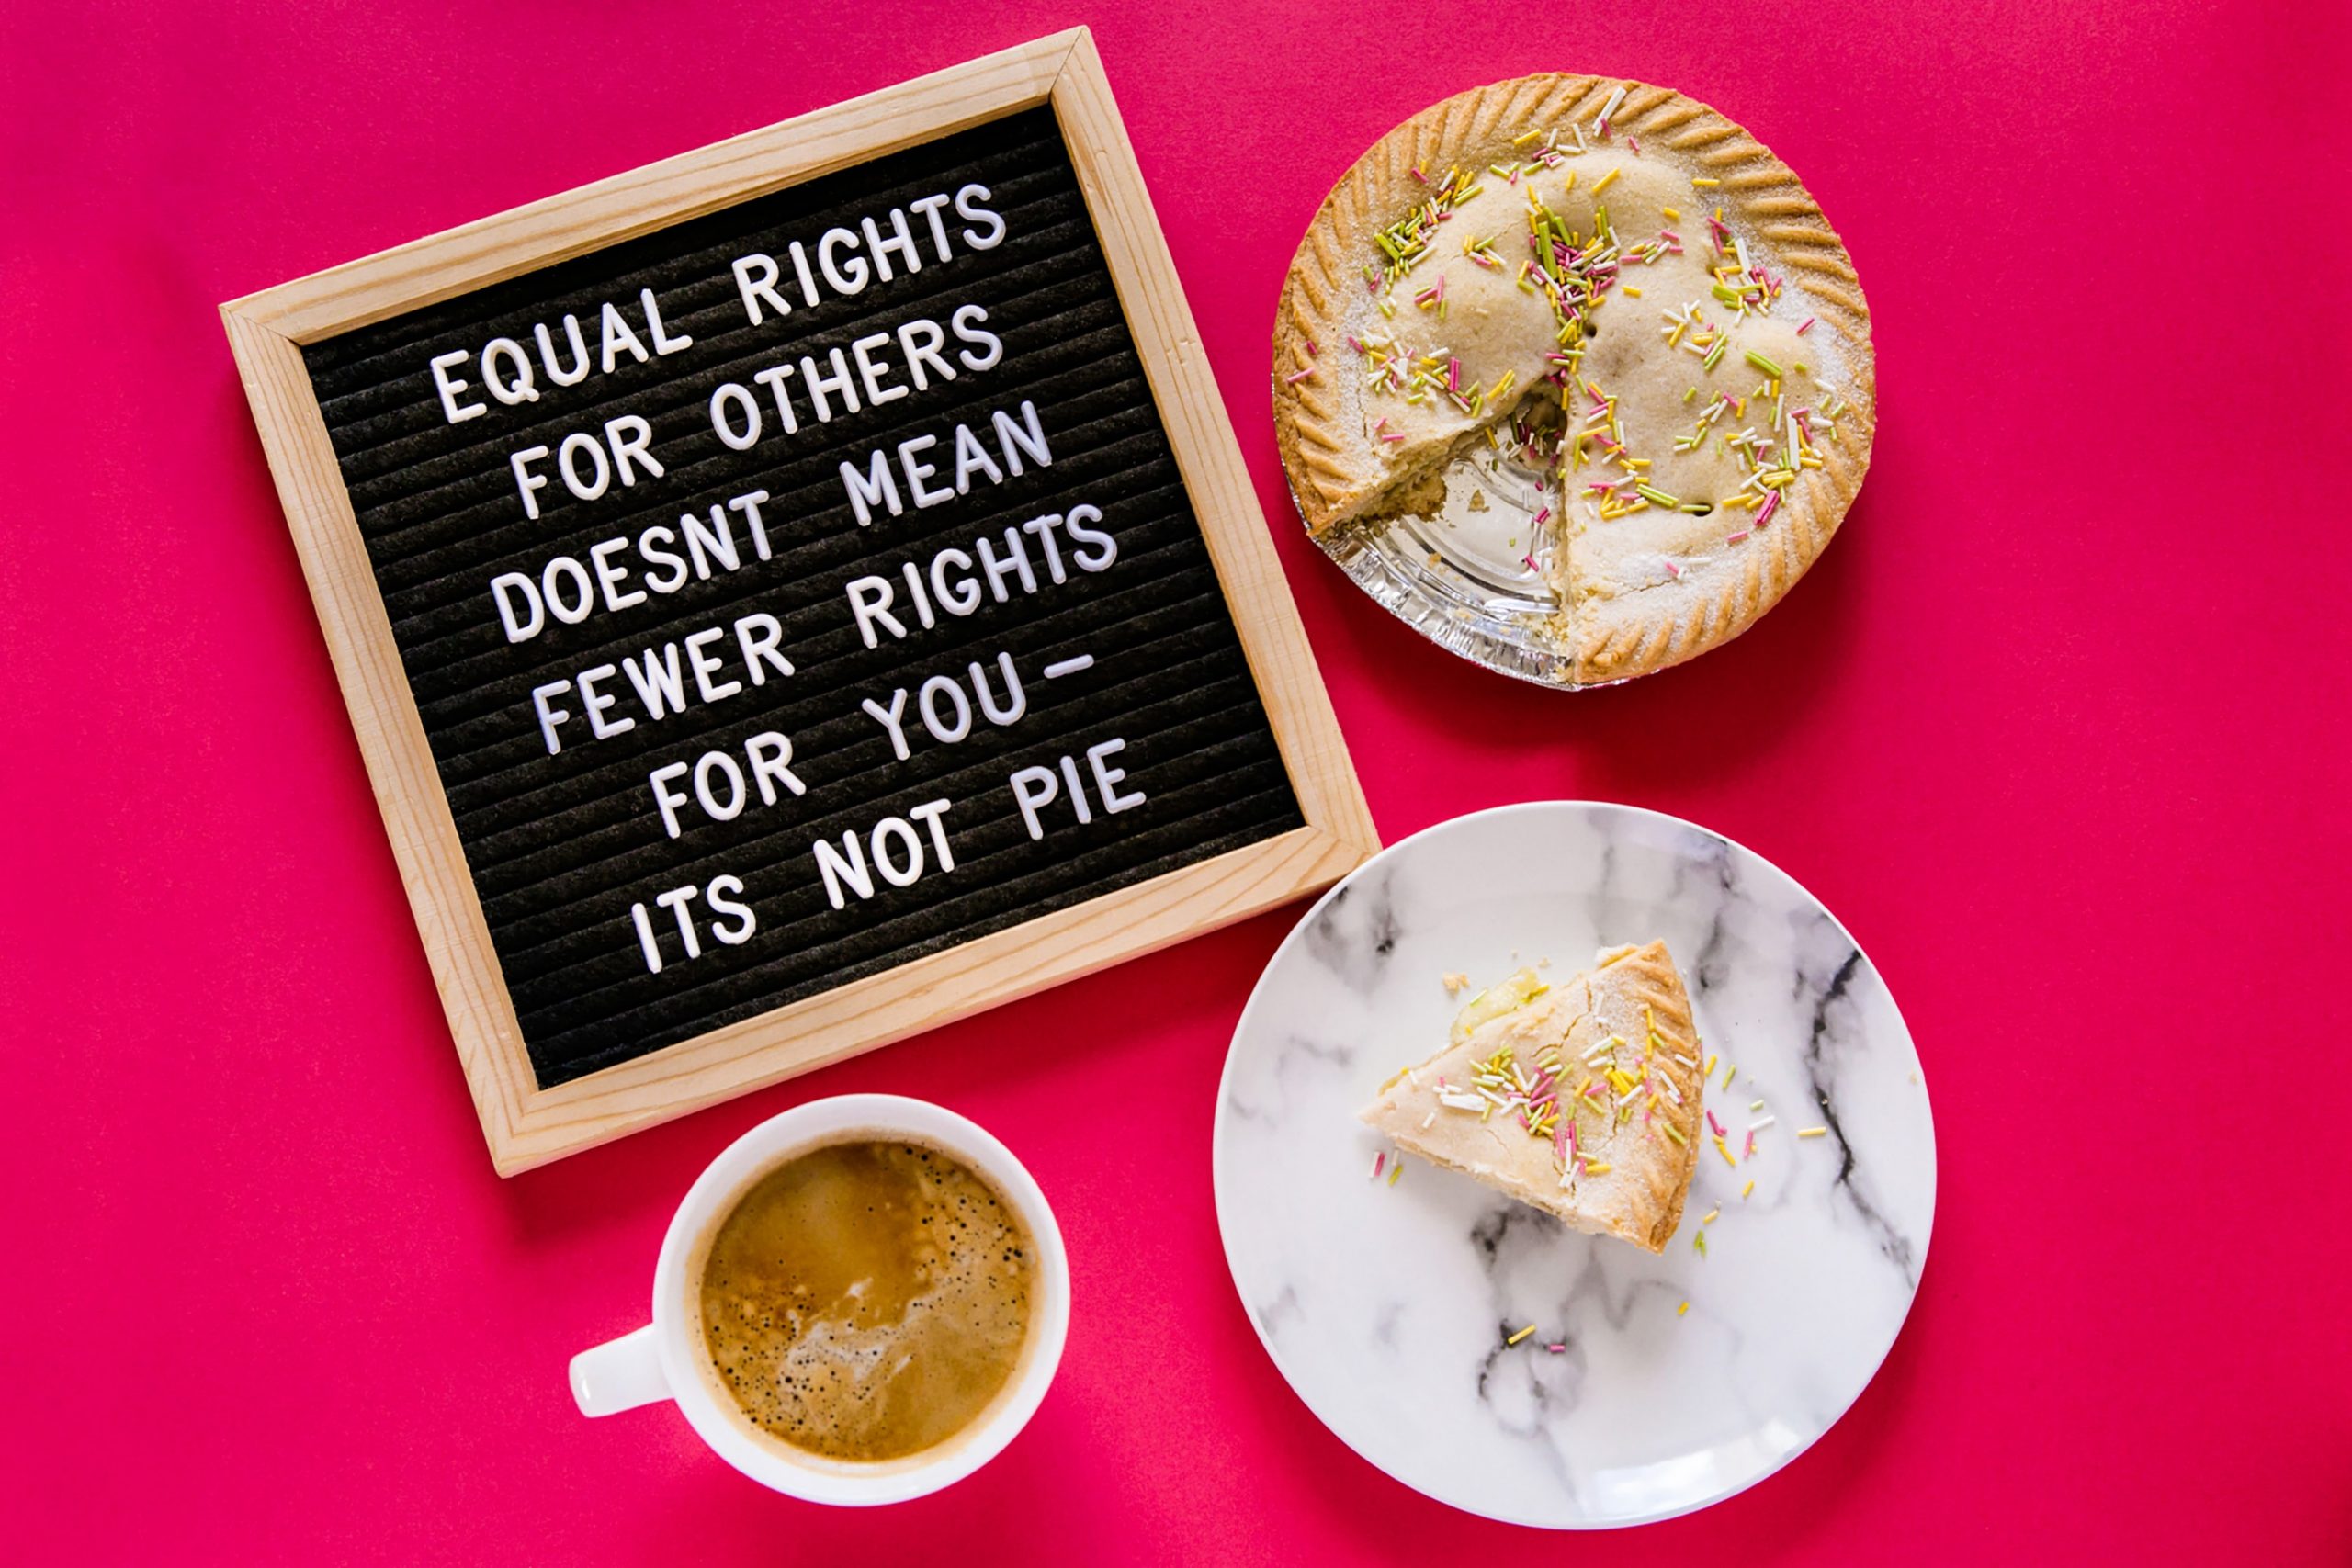 On a red background there is a spread of a coffee mug, a pie, and a plate with a slice of the pie on i. A blackboard lies next to it and reads "equal rights for others doesn't mean fewer rights for you. It's not pie.